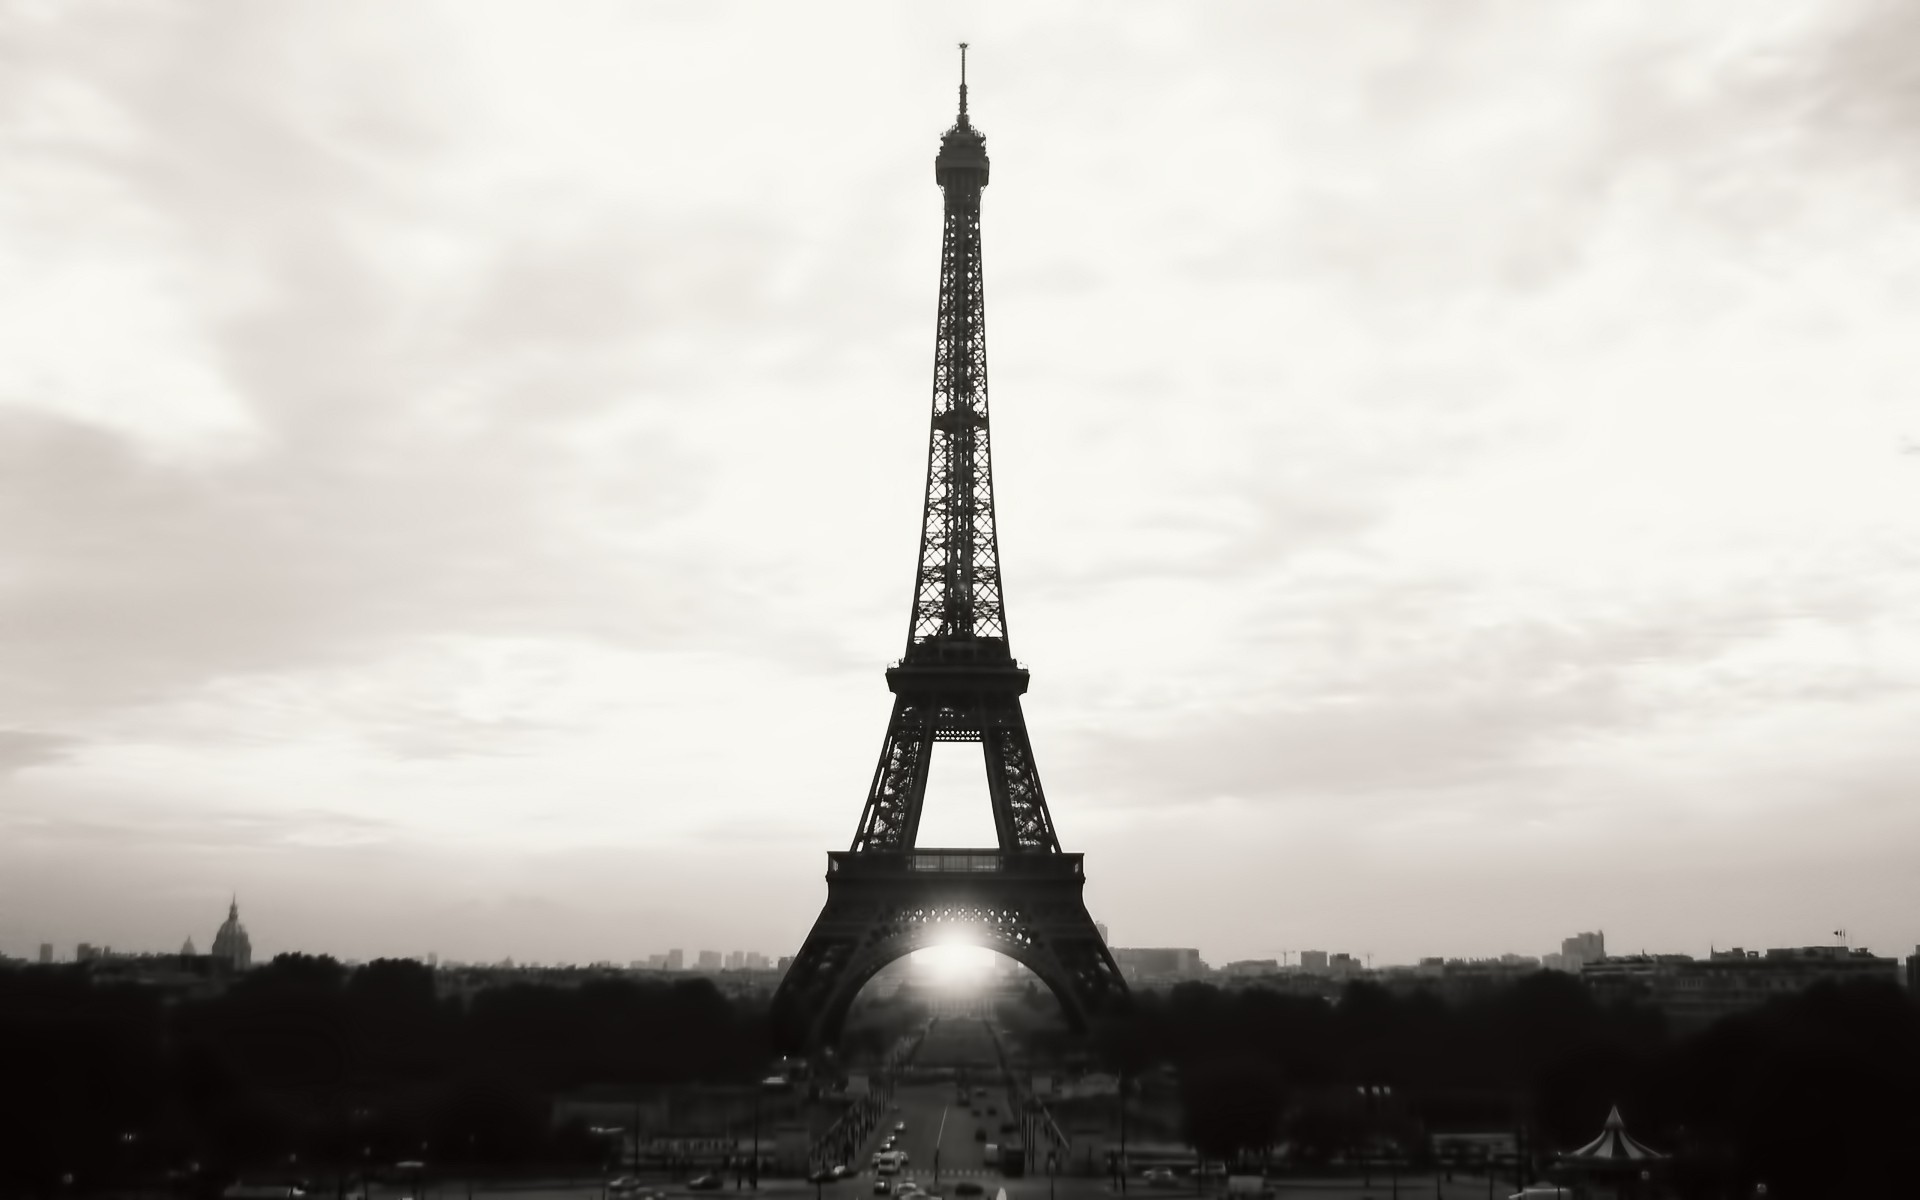 1920x1200 Black And White Paris Wallpaper Picture For Desktop Wallpaper 1920 x 1200  px 692.31 KB girly